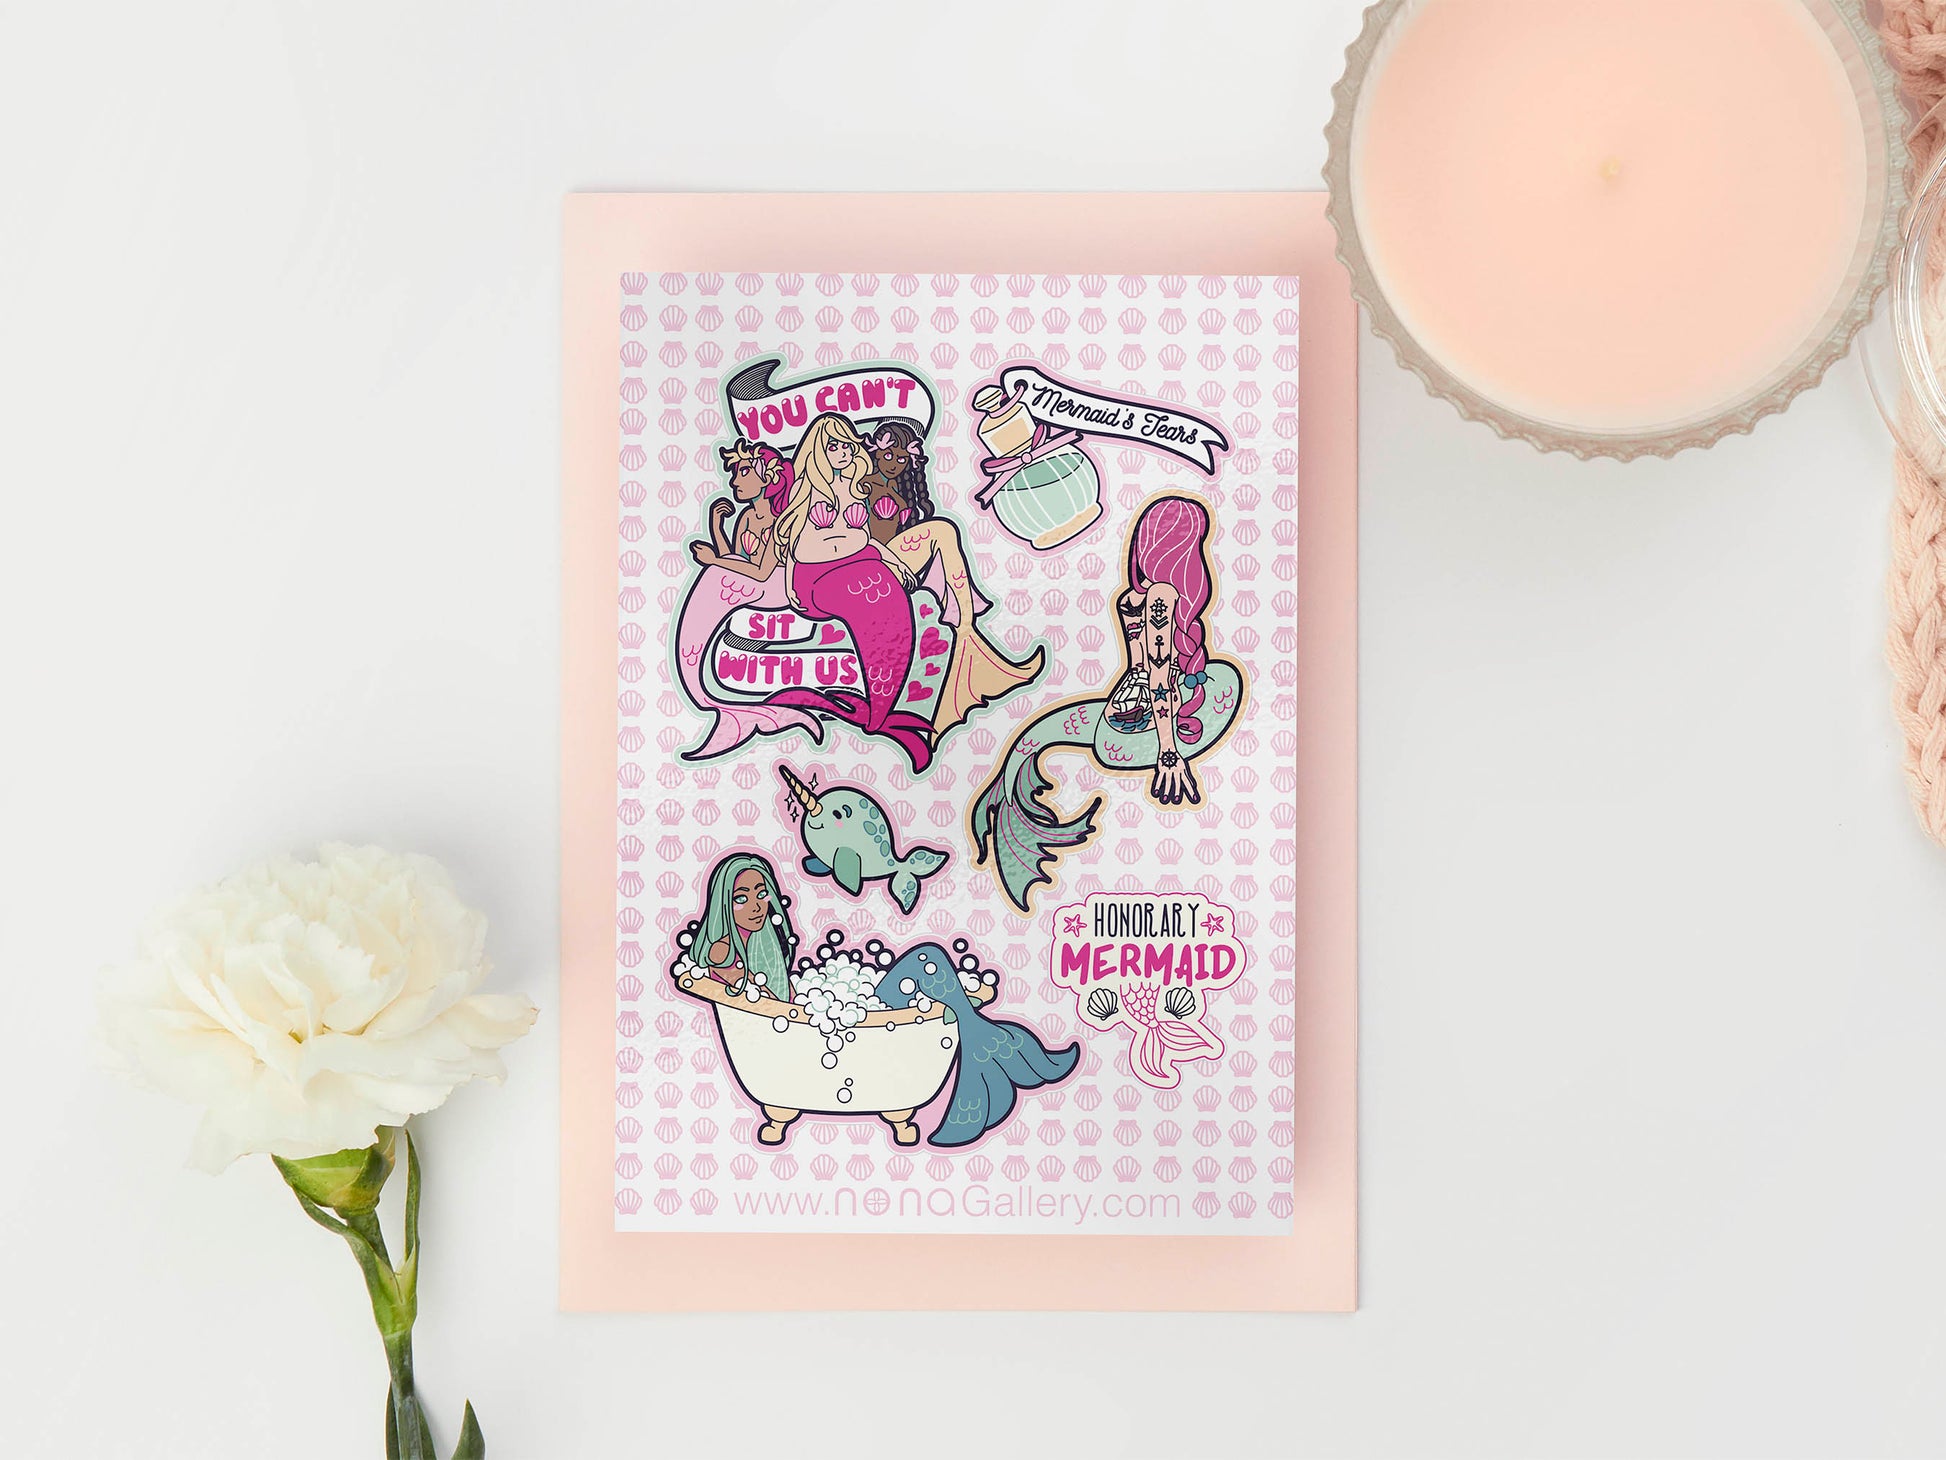 Large sticker sheet of digital illustration cartoons of mermaids, quotes, narwhals and perfume bottles